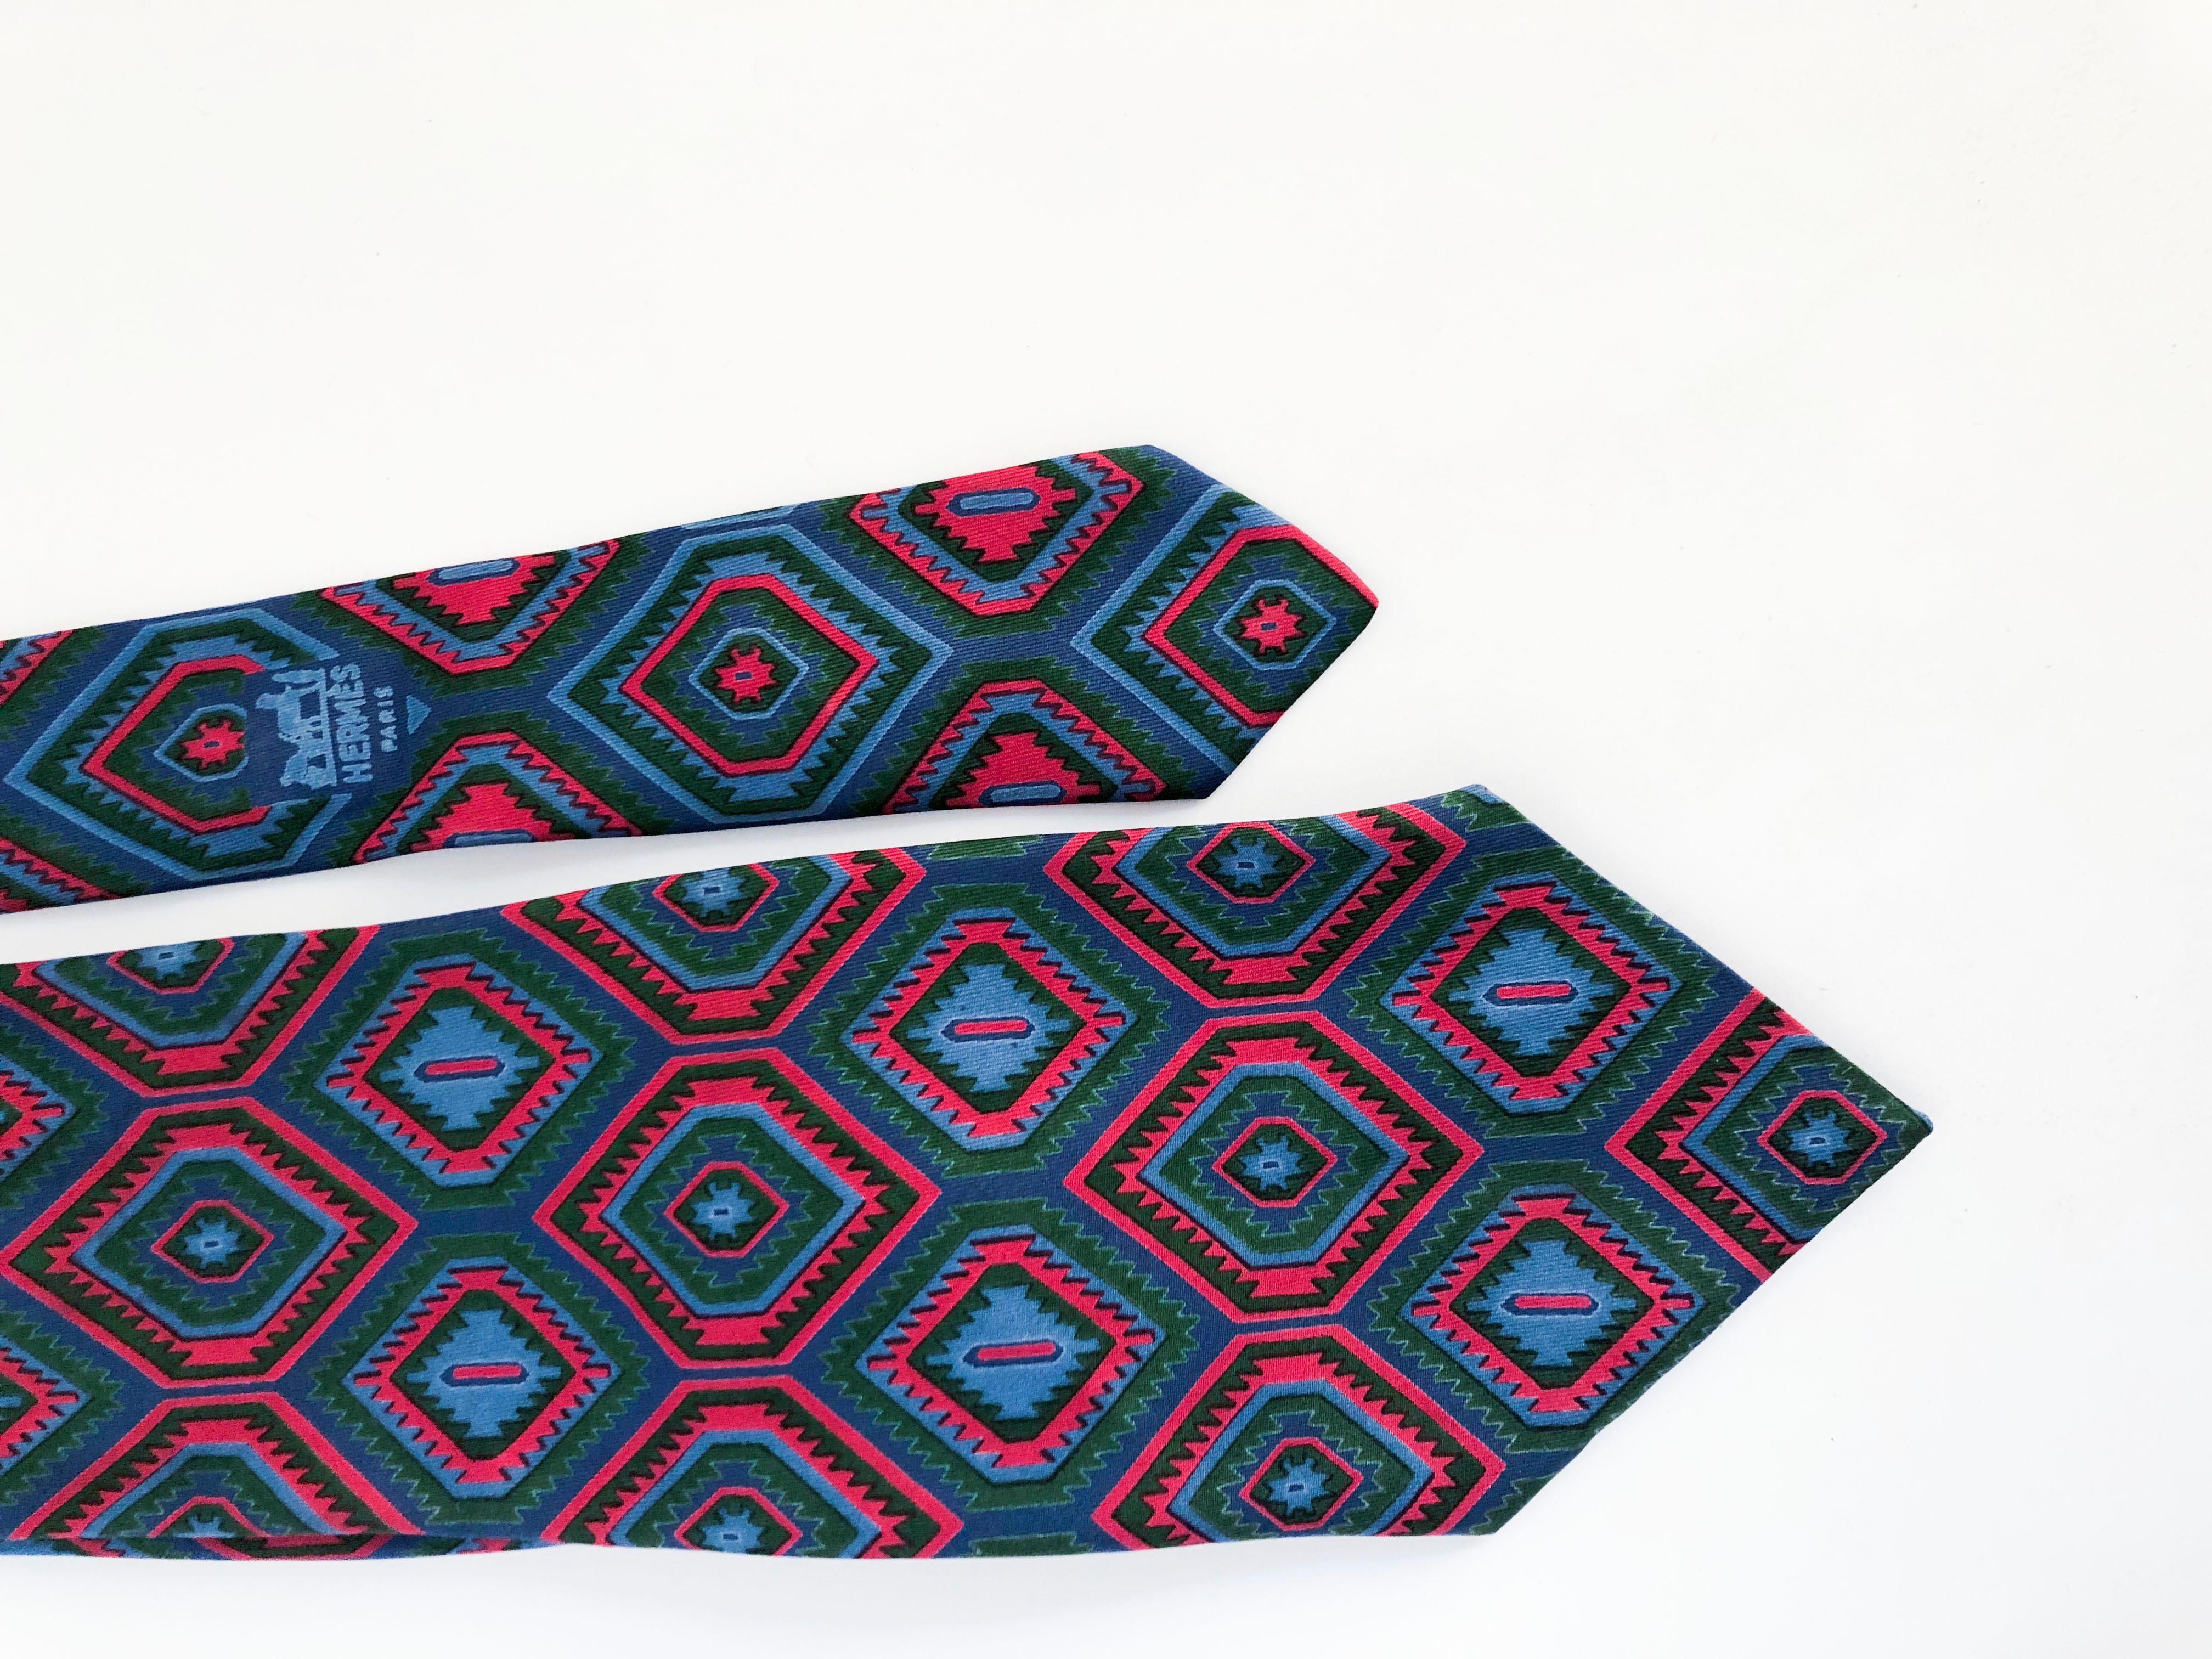 Hermès SIlk Tie with Diamond Pattern in blue, light blue, green, and red.